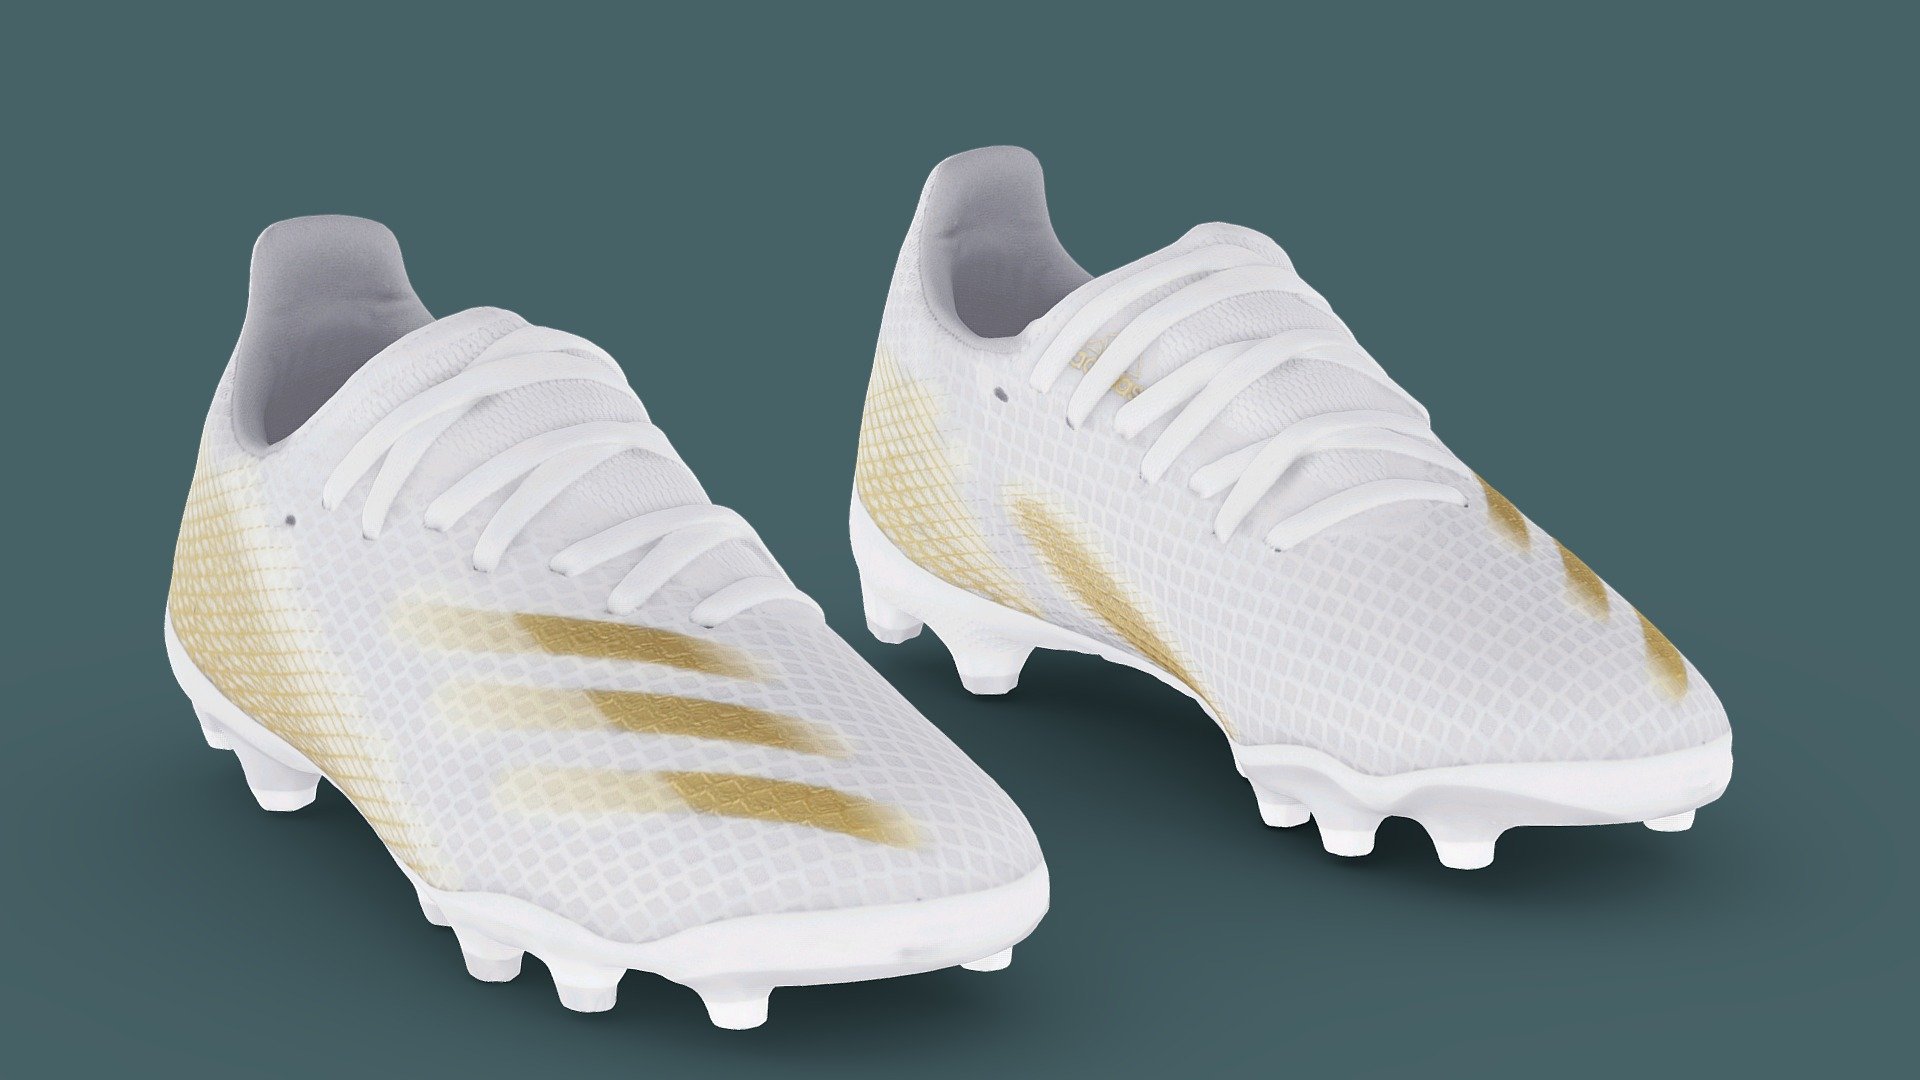 Adidas X Ghosted 3 Mg J Soccer Football Shoes - Buy Royalty Free 3D ...